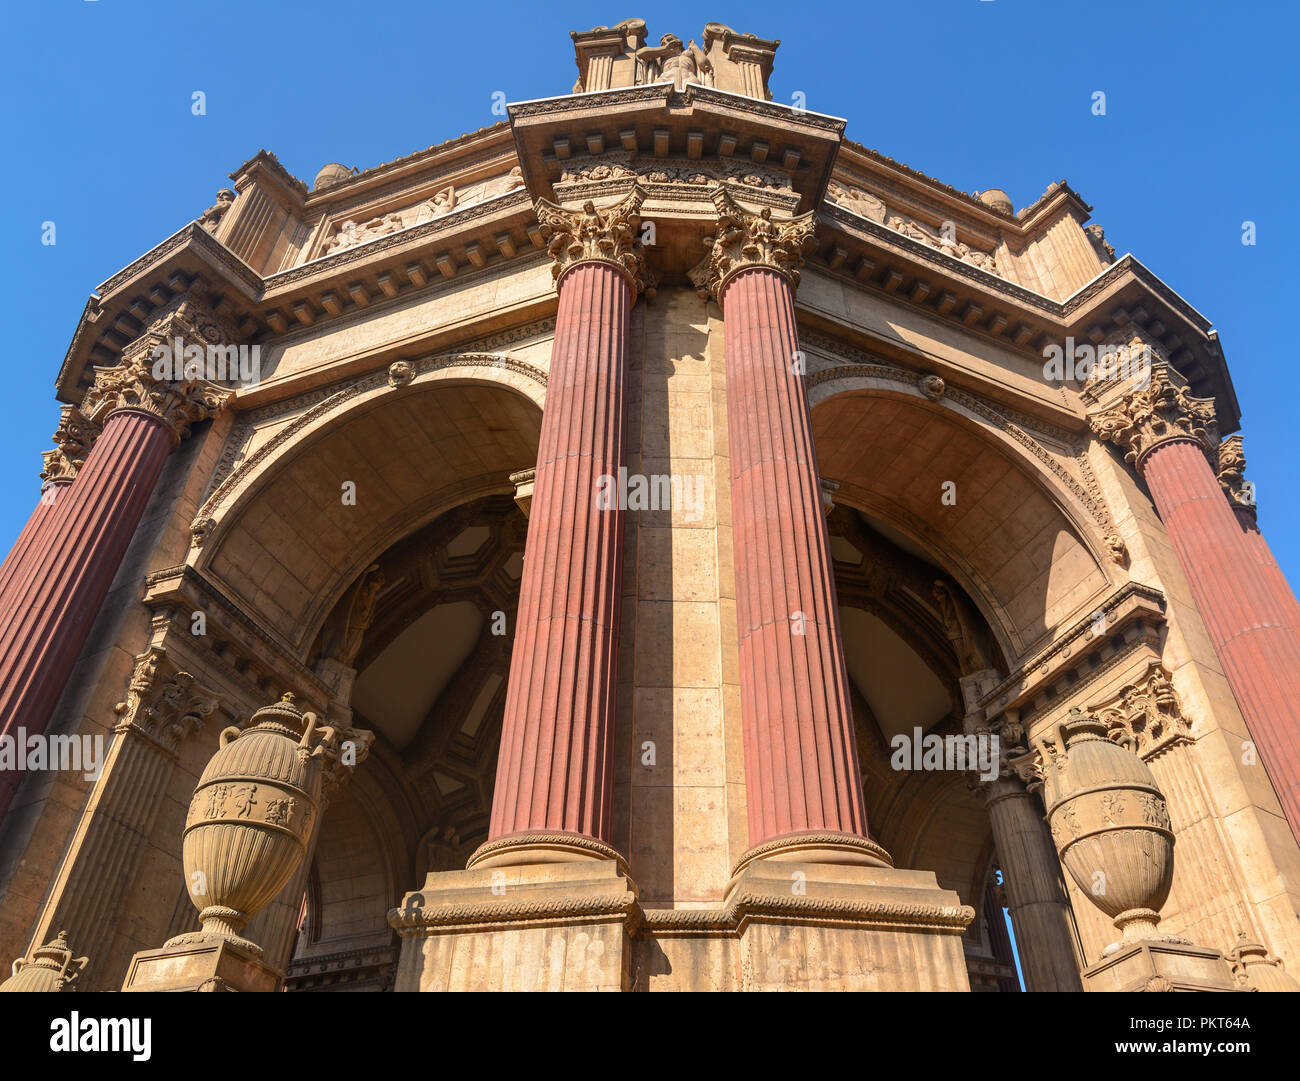 The Exterior Detail Of The Large White Dome Of The Palace Of Fine Arts Theatre In San Francisco Stock Photo